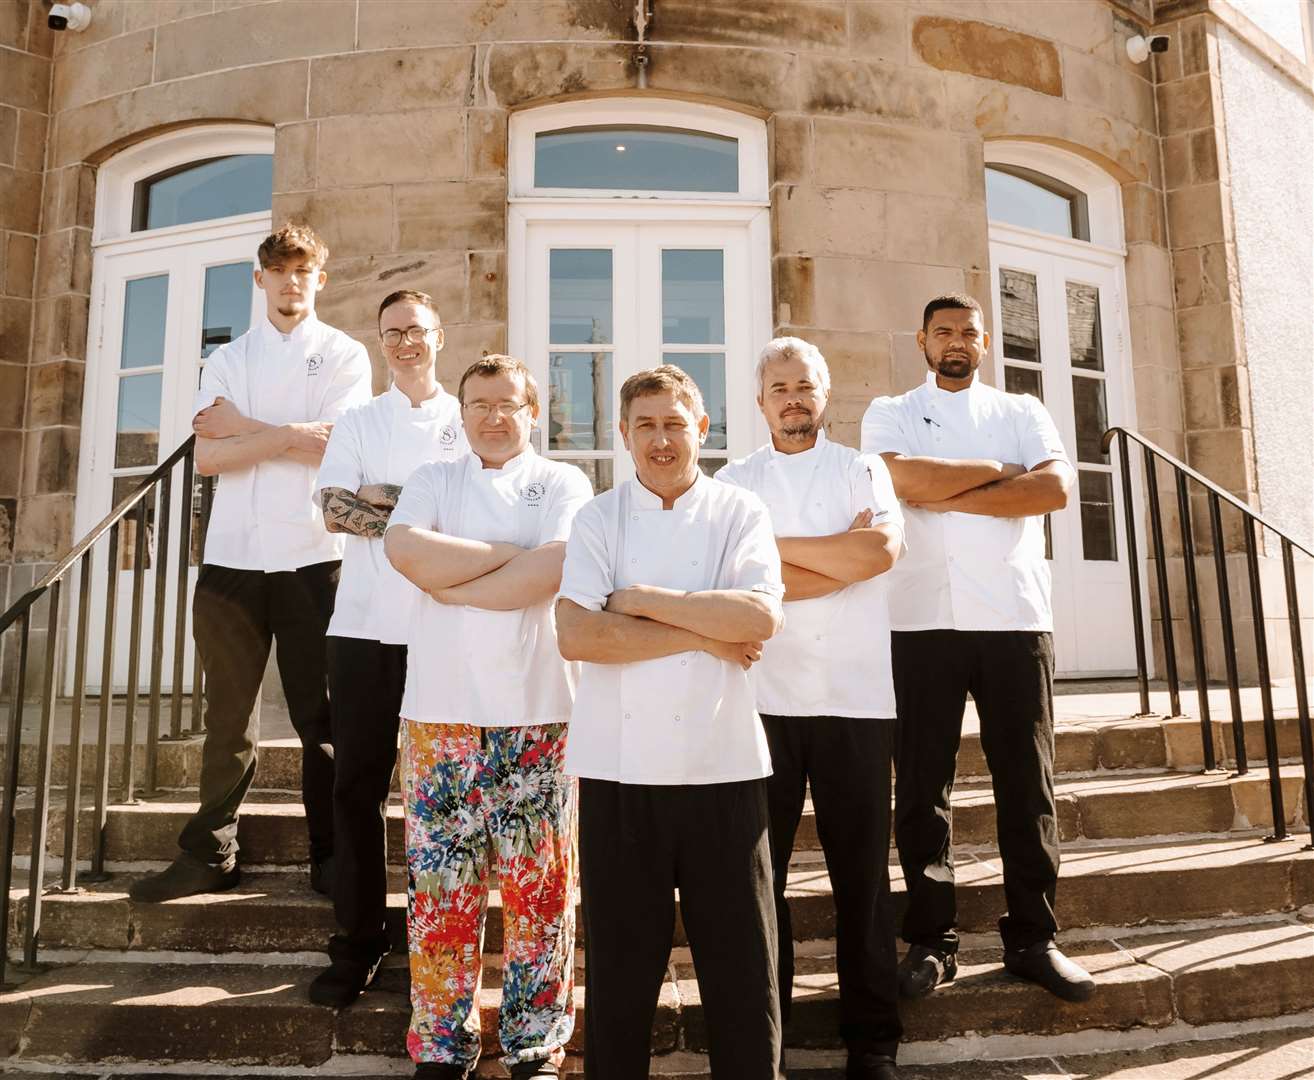 Cooking up some top class awards are the Seafield Arms chef team (from left) Gregor Willliamson, Aiden Clark, David McConachie, Luke Green, Jacobus Snow and Nathan Samuels . Picture: Seafield Arms Hotel